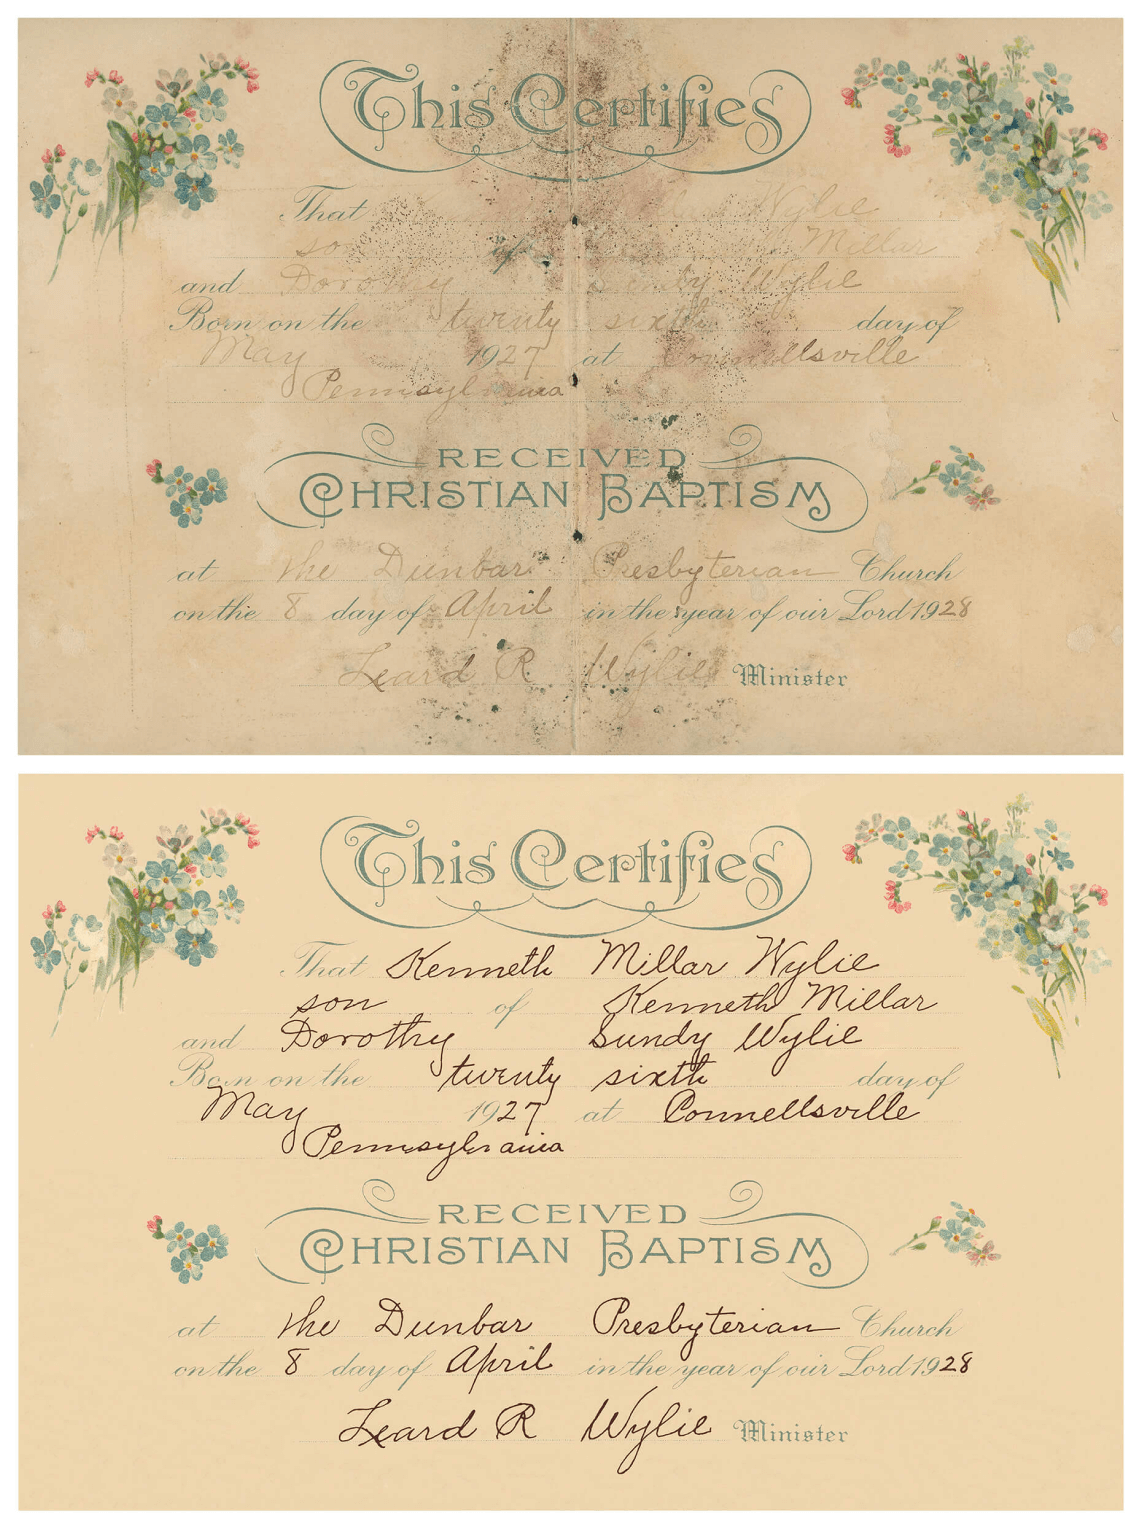 Collage of Restored Certificate with Old Certificate